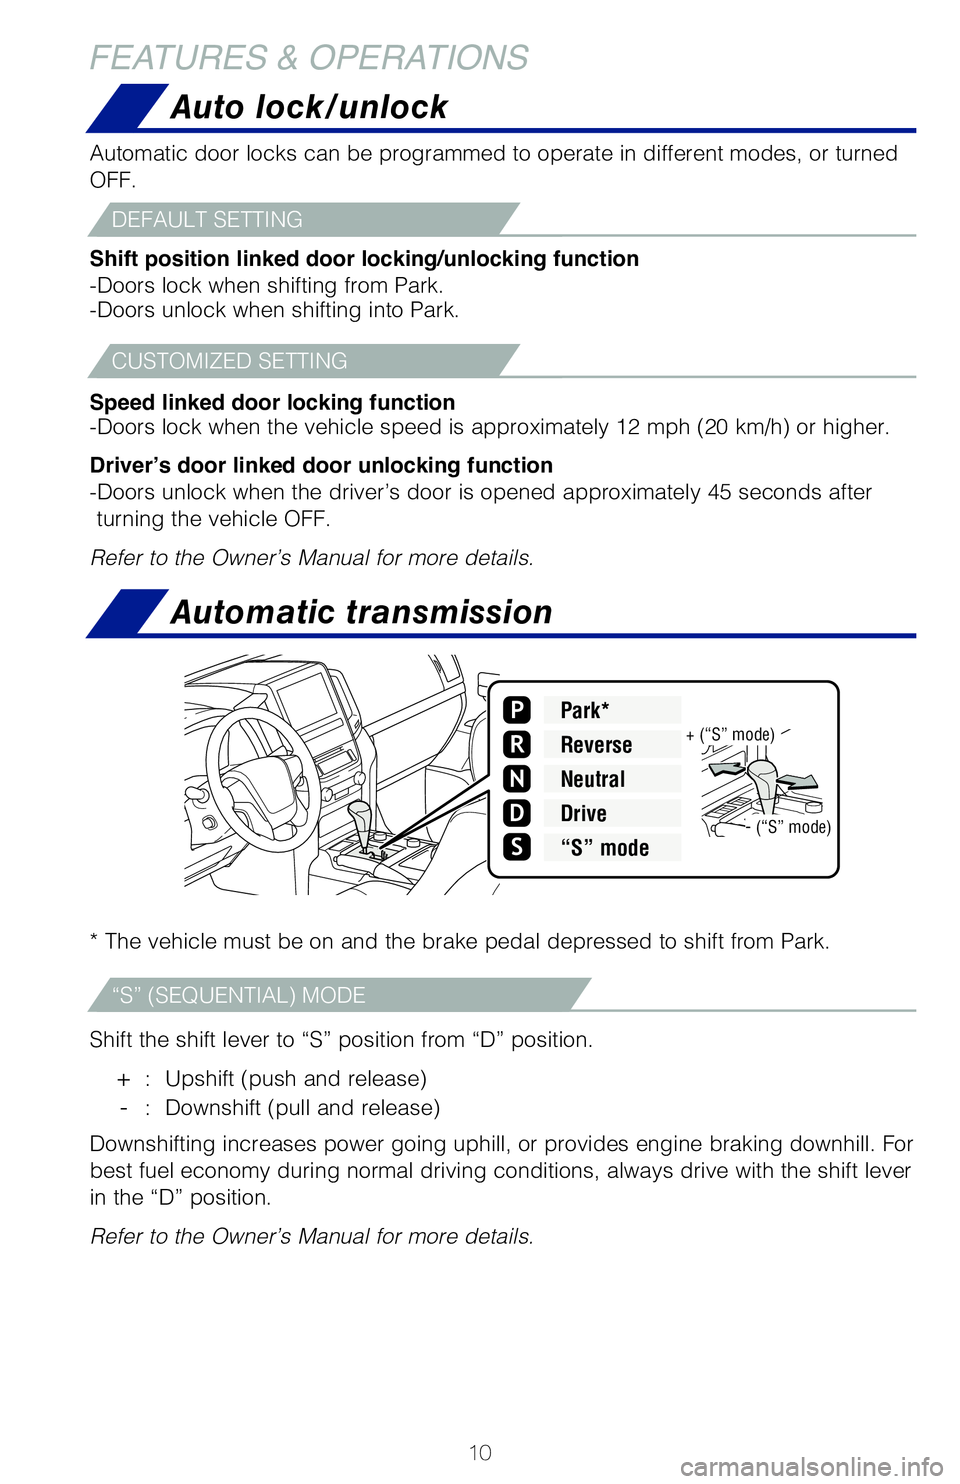 TOYOTA LAND CRUISER 2021  Owners Manual (in English) 10
Auto lock/unlock
Automatic transmission
* The vehicle must be on and the brake pedal depressed to shift from Par\
k.
Shift the shift lever to “S” position from “D” position.
 + :  Upshift (